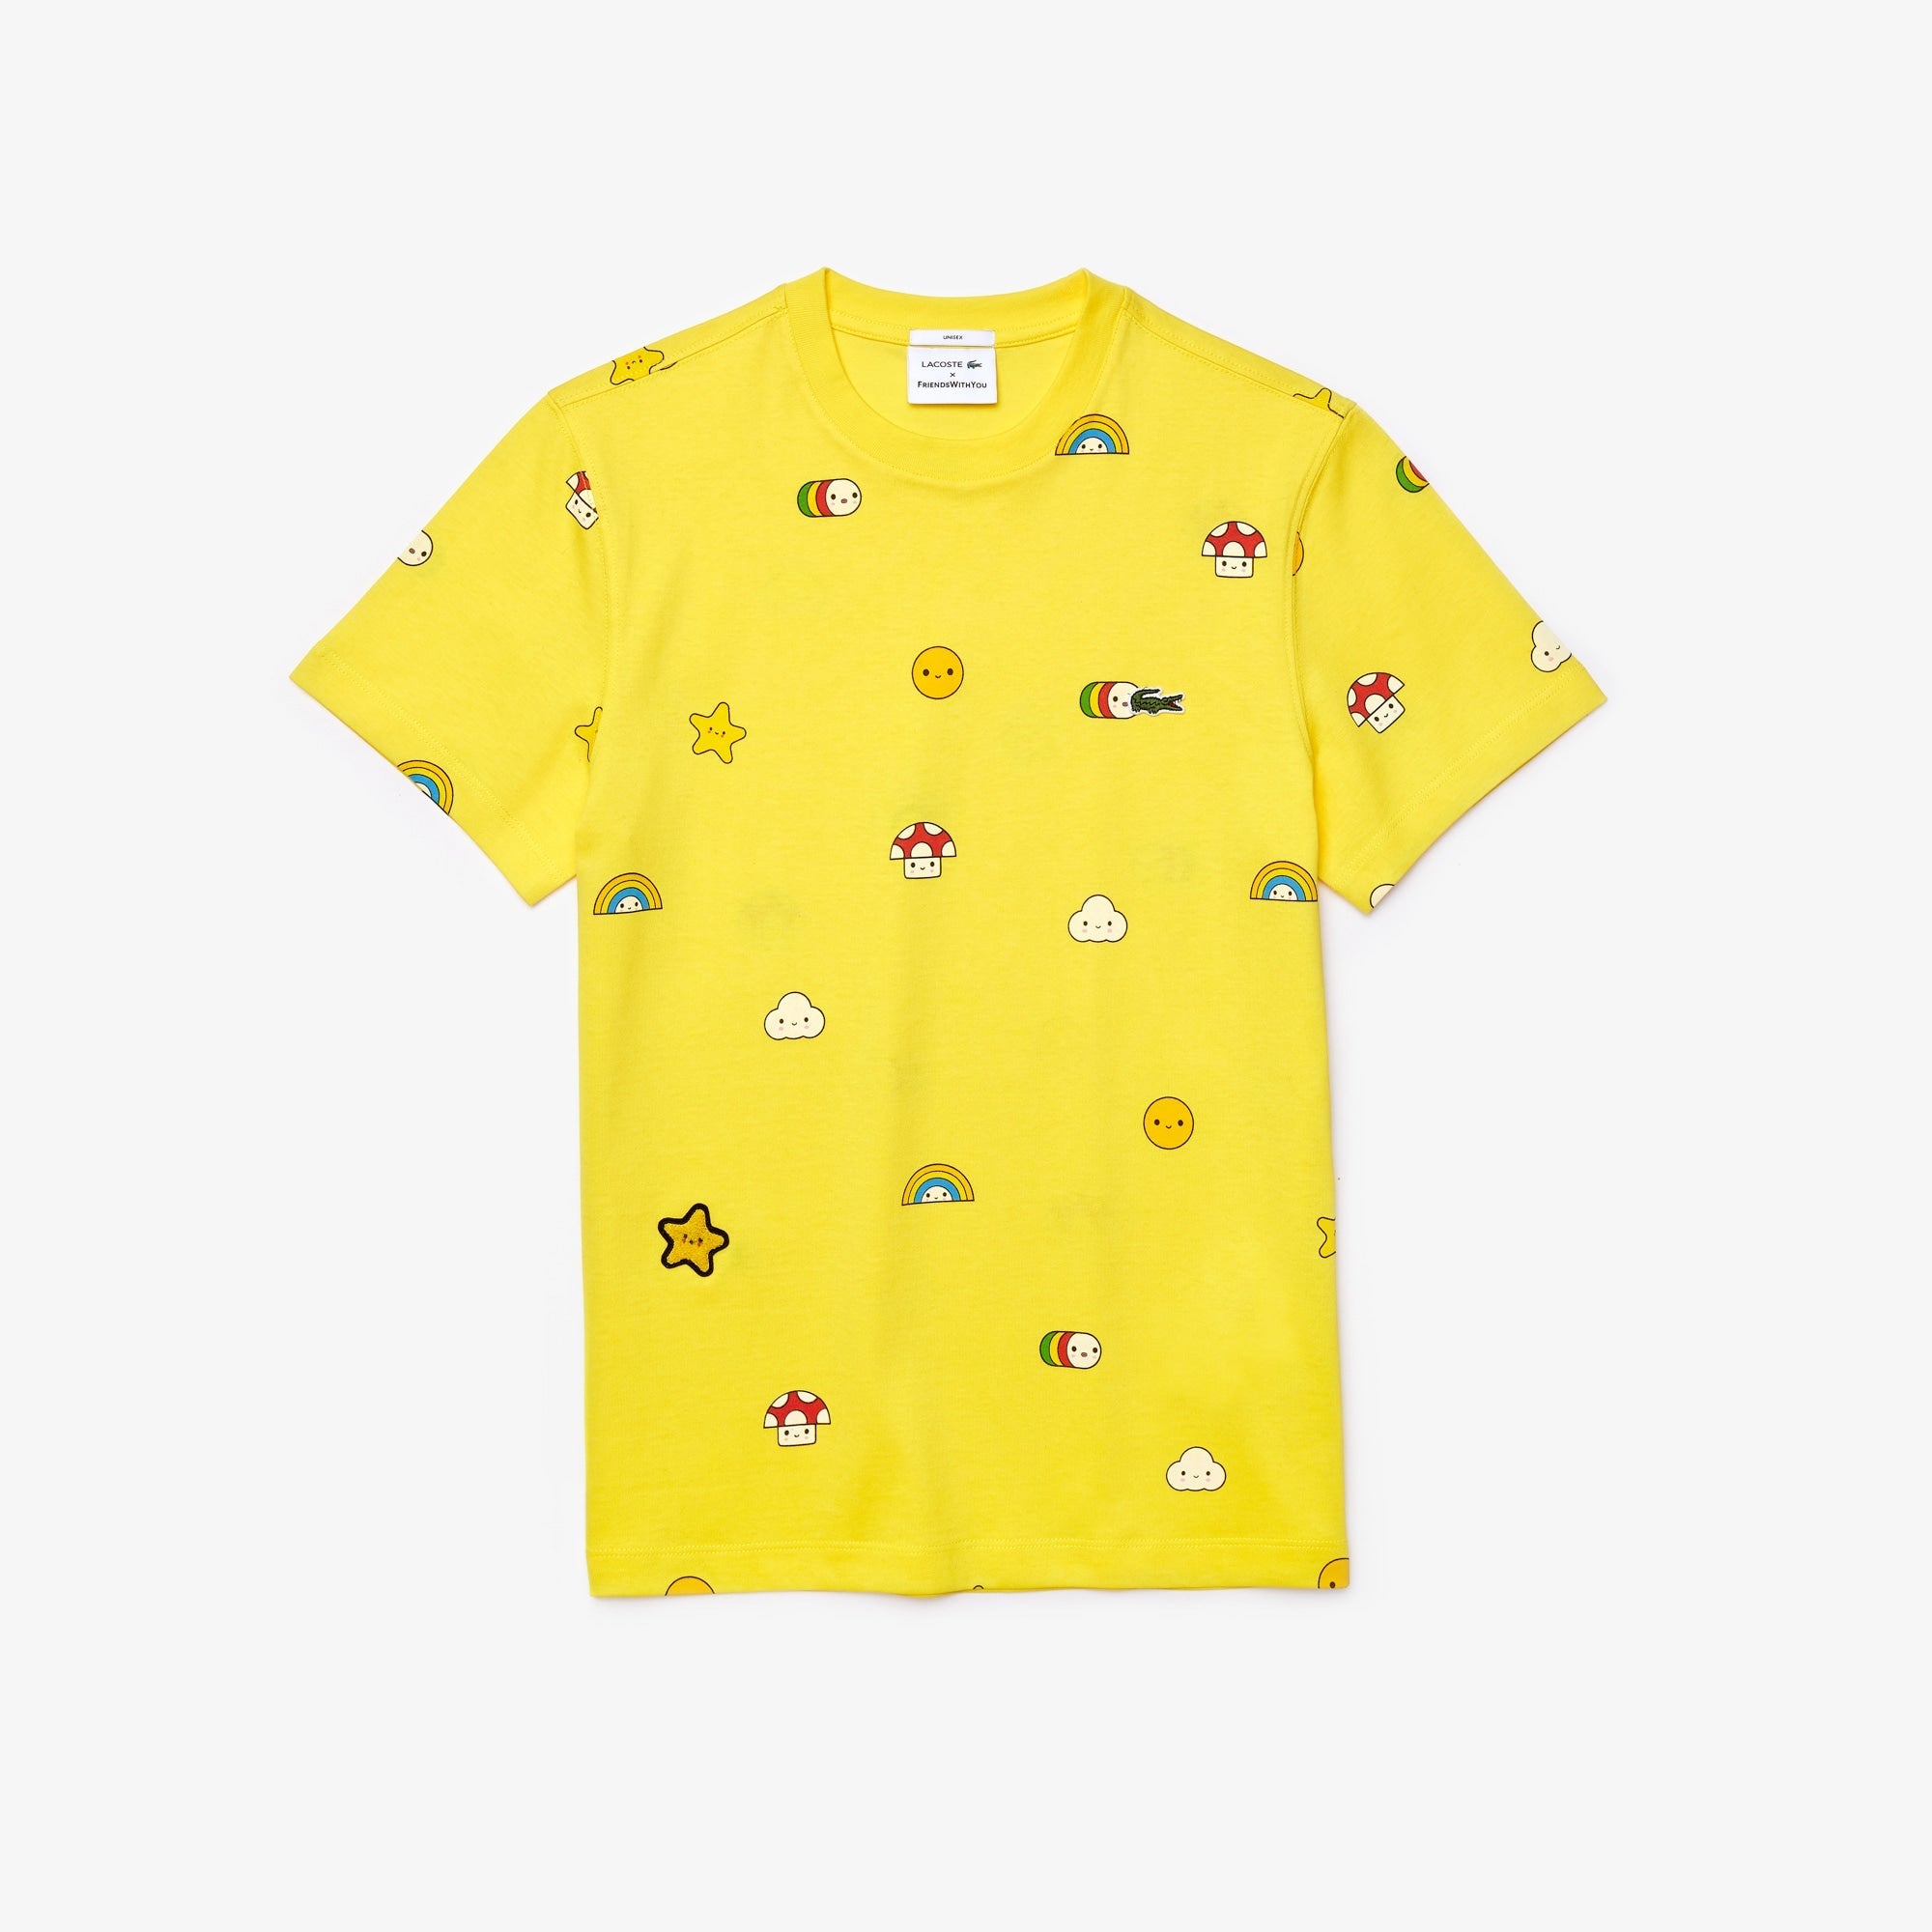 Unisex T-shirt Limited-Edition Appare ASPHALT FriendsWithYou Graphic x LACOSTE –